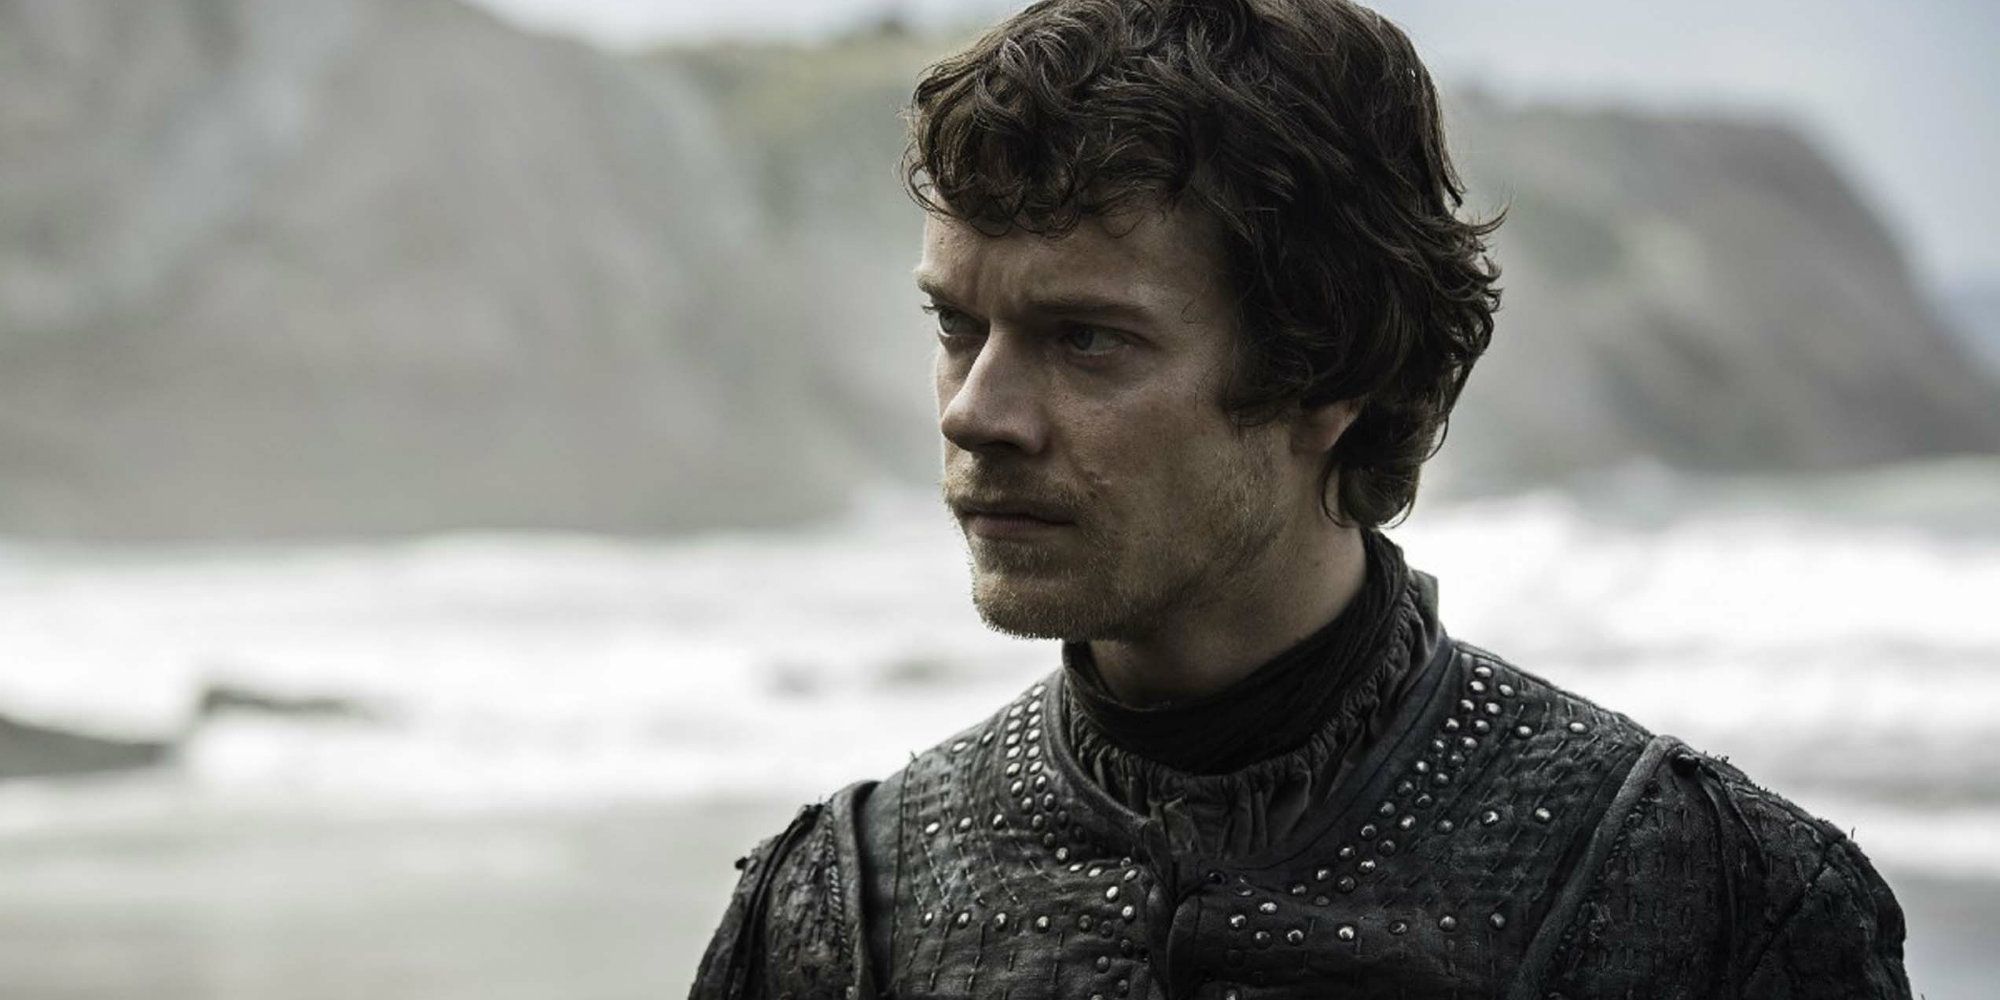 Theon Greyjoy standing on a beach in Game of Thrones